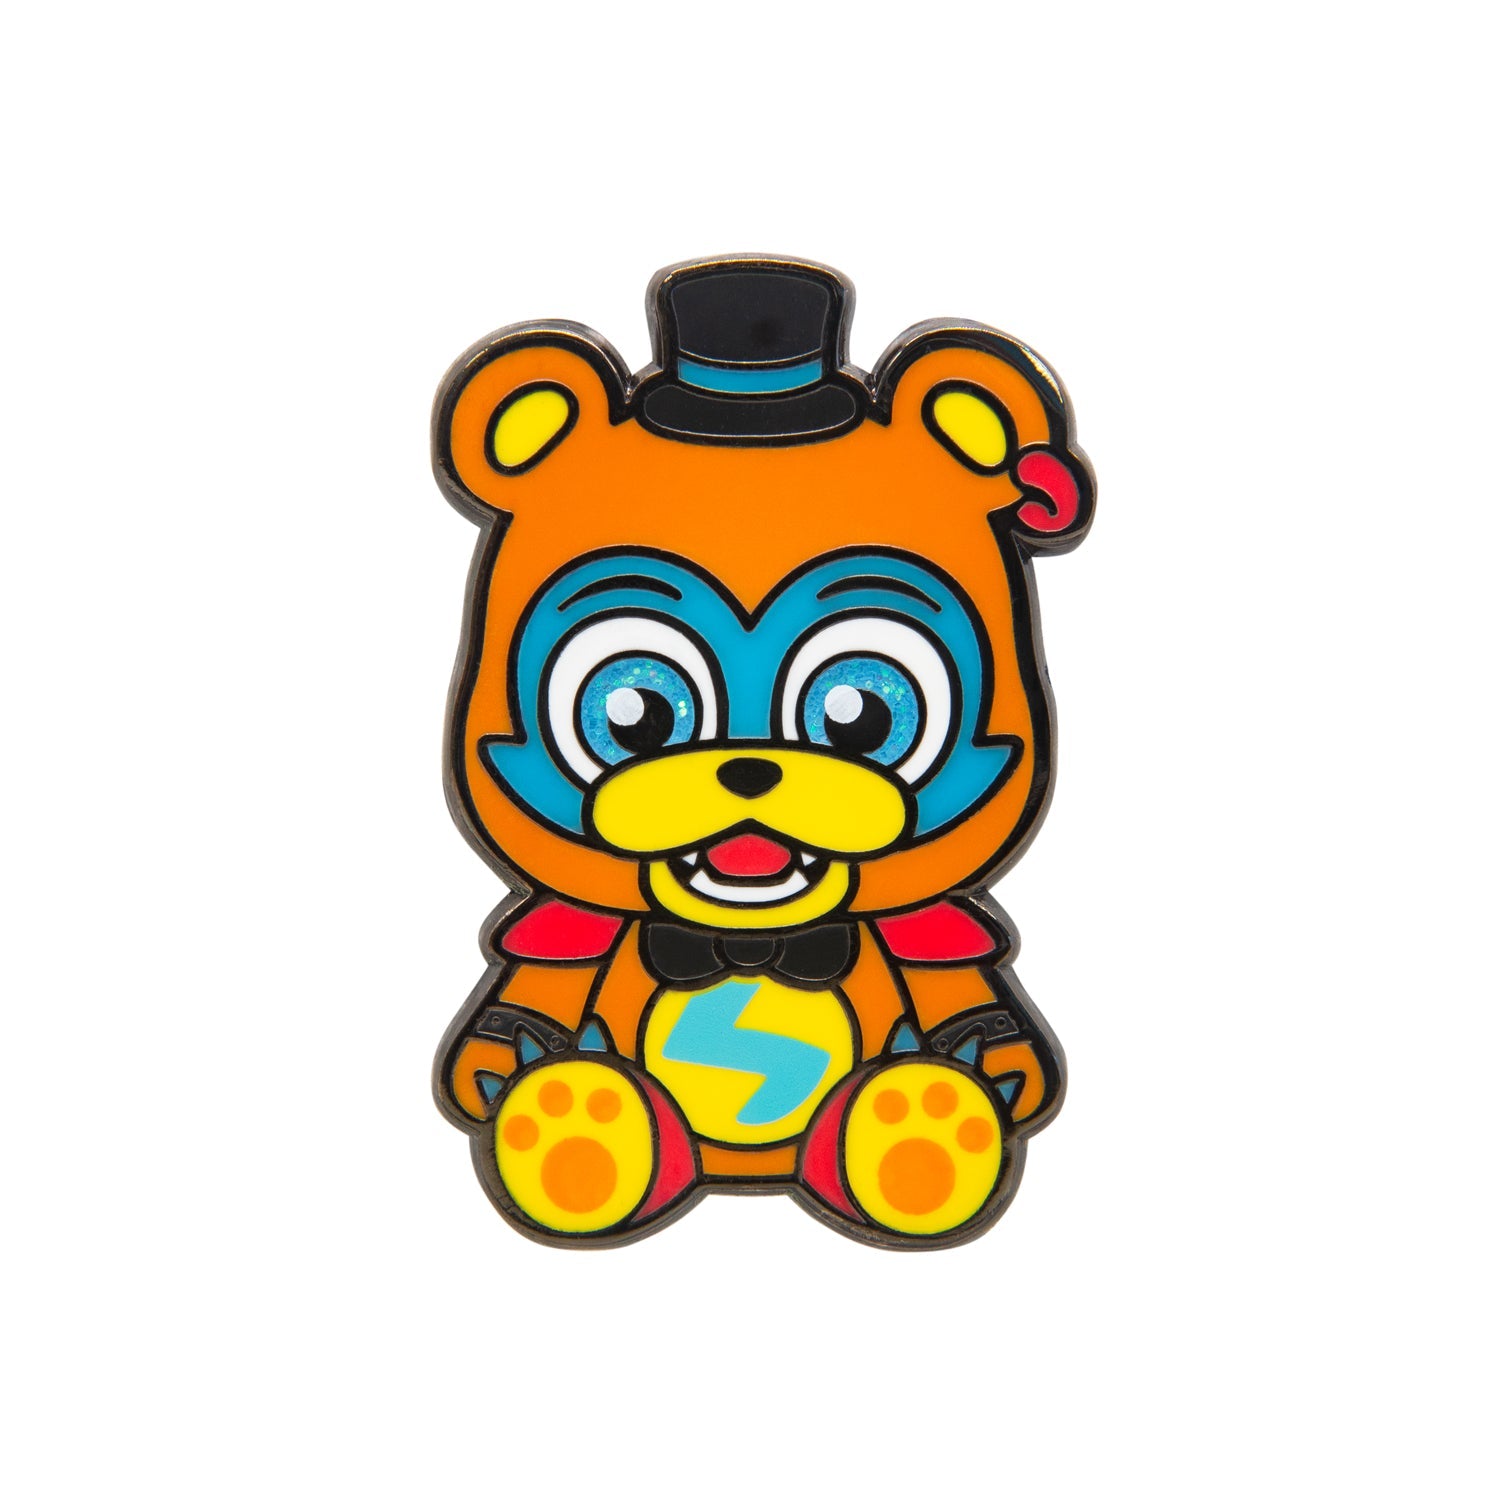 Fnaf Chibi Five Nights at Freddy's  Sticker for Sale by AldoEan